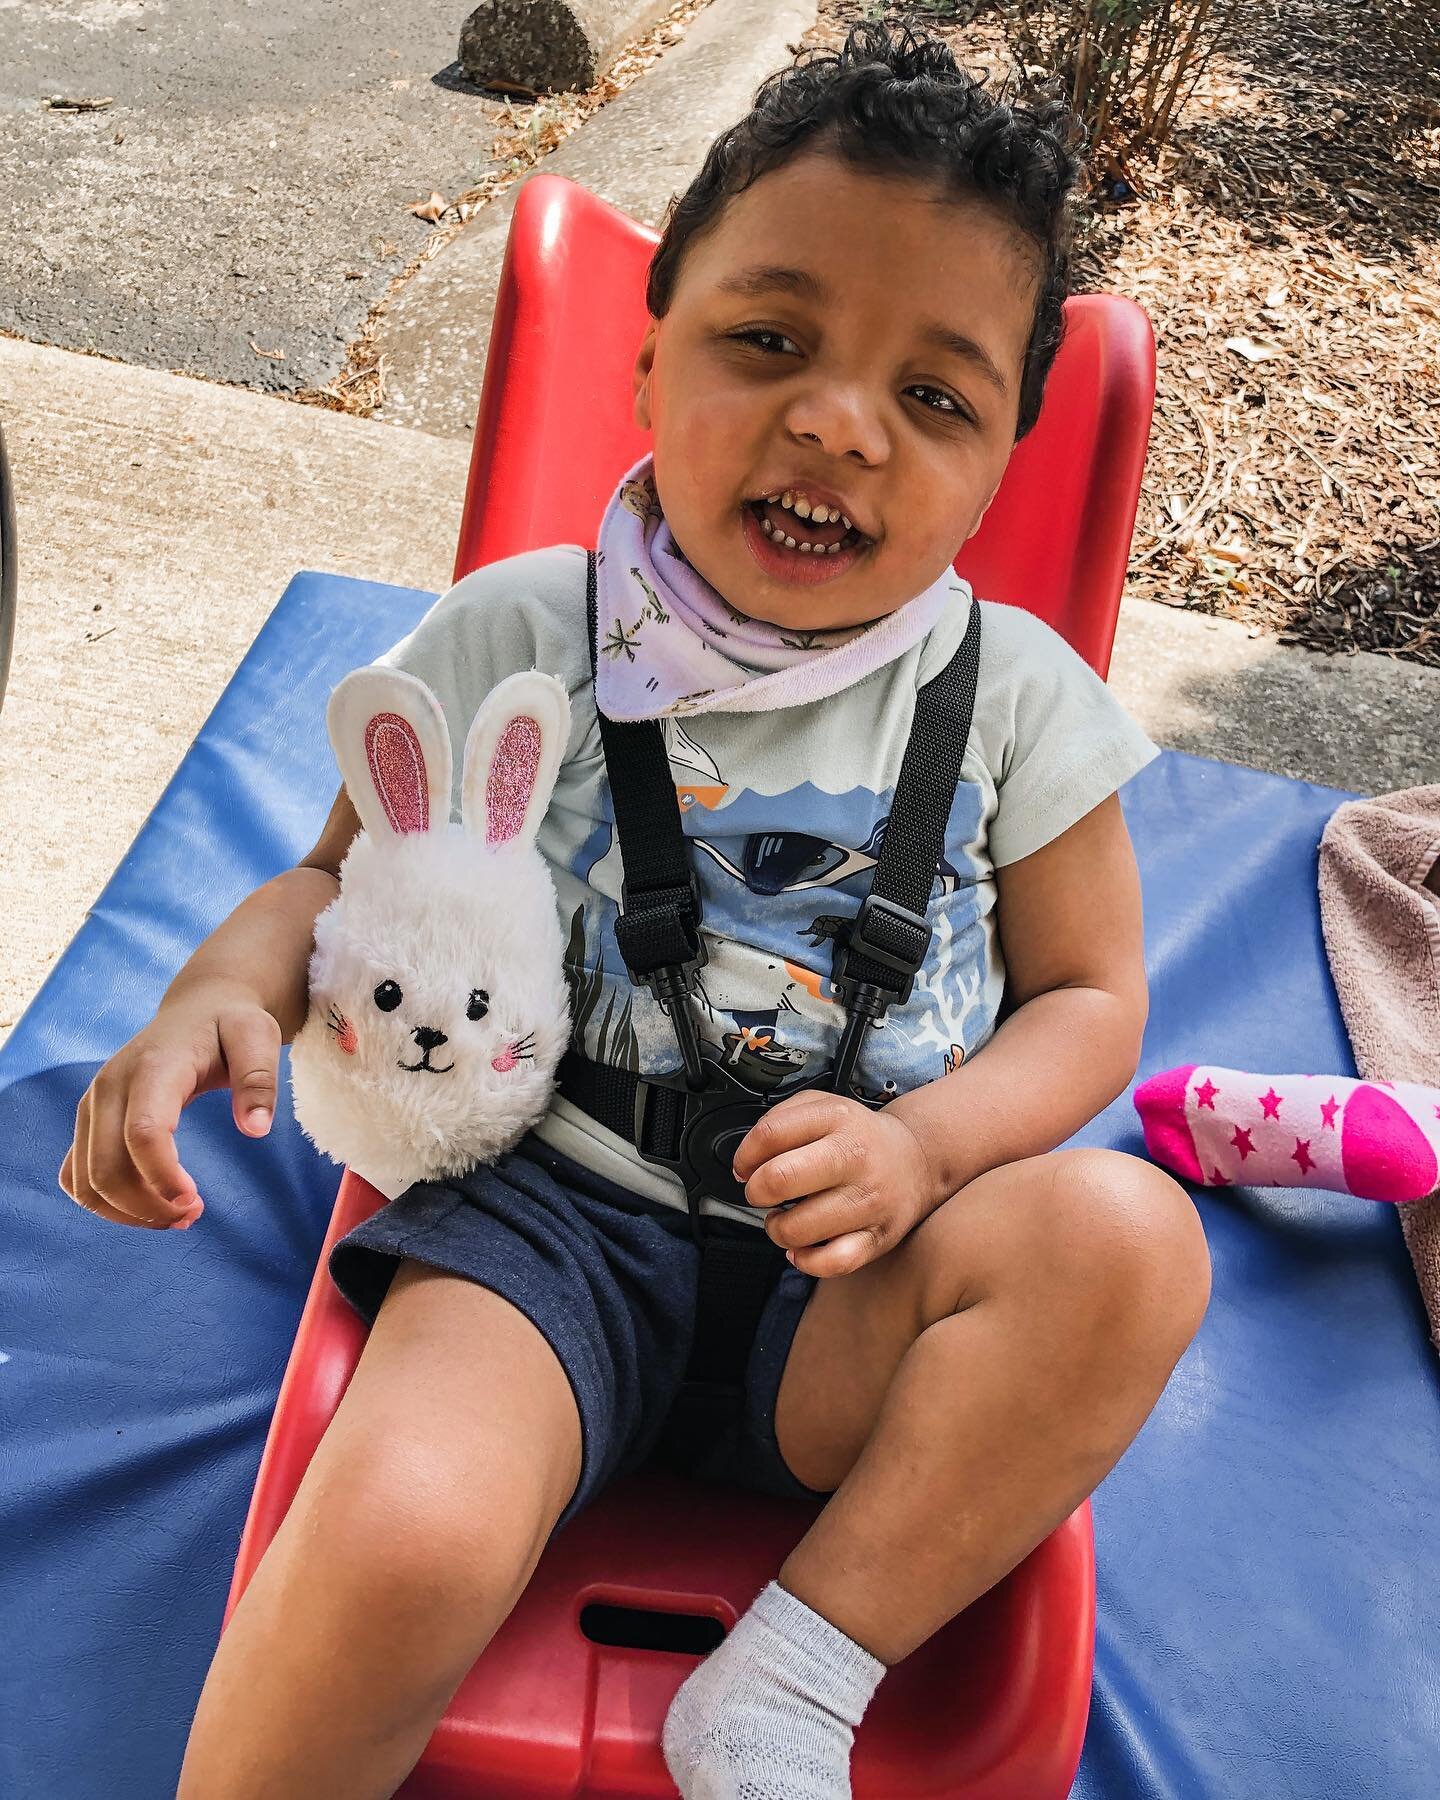 We hope every bunny had a hoppy Easter and enjoyed that sunshine yesterday! 🐰☀️ 

Our nursing and therapy center both celebrated last week with lots of Easter egg hunts, surprise gifts, and Easter themed activities with the kids. Lots of fun was had